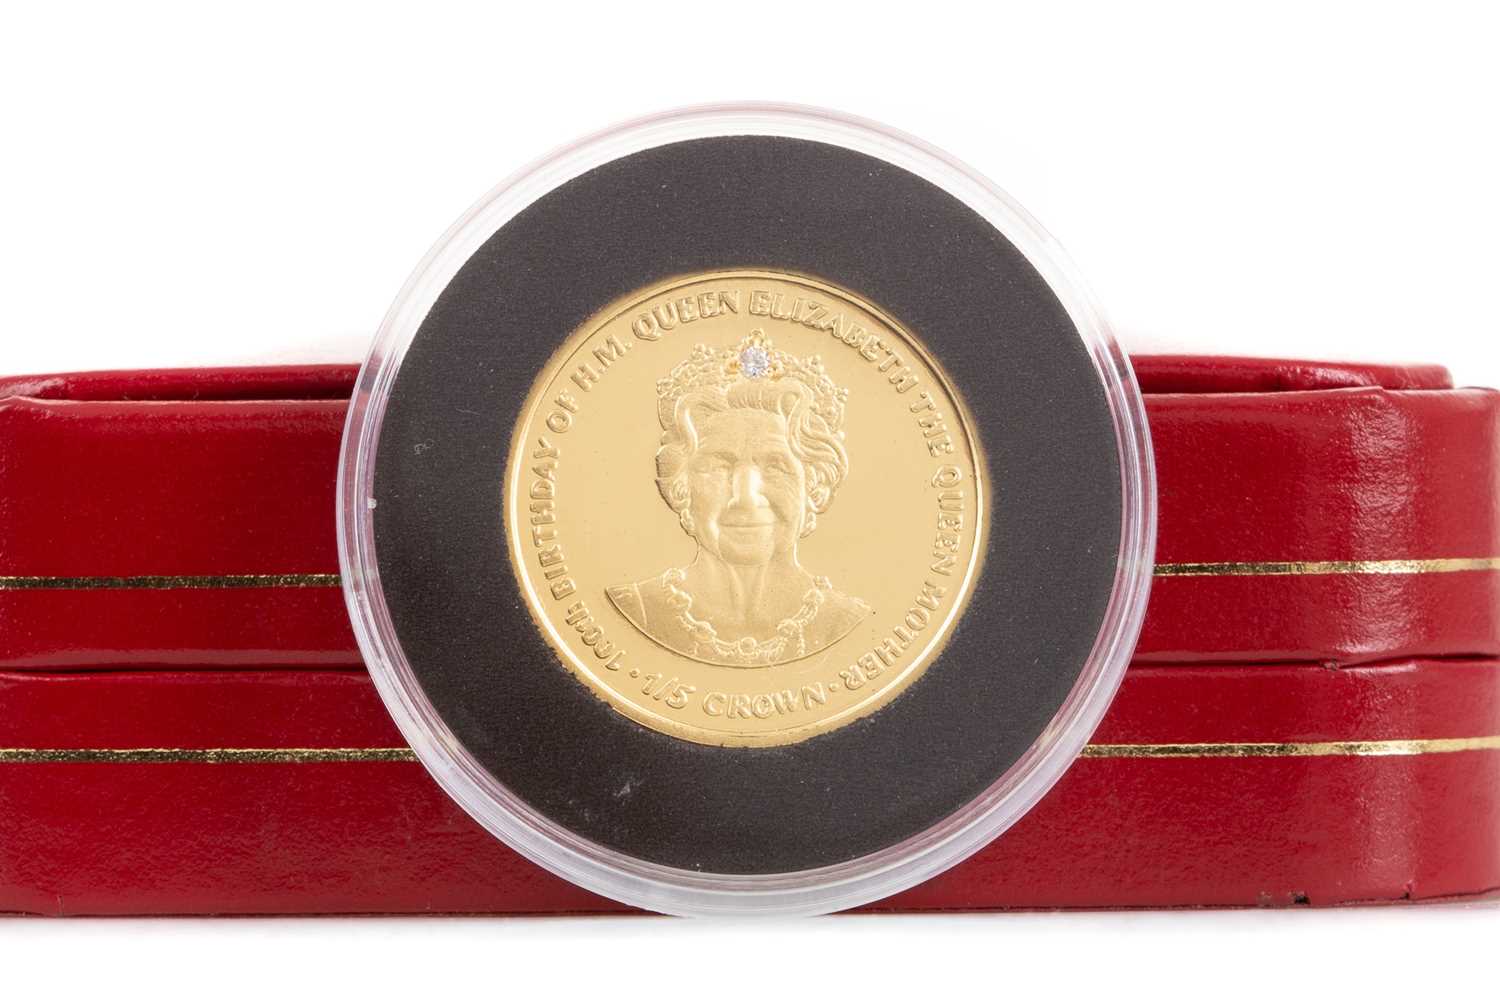 Lot 61 - THE 2000 GIBRALTAR GOLD PROOF ONE FIFTH CROWN